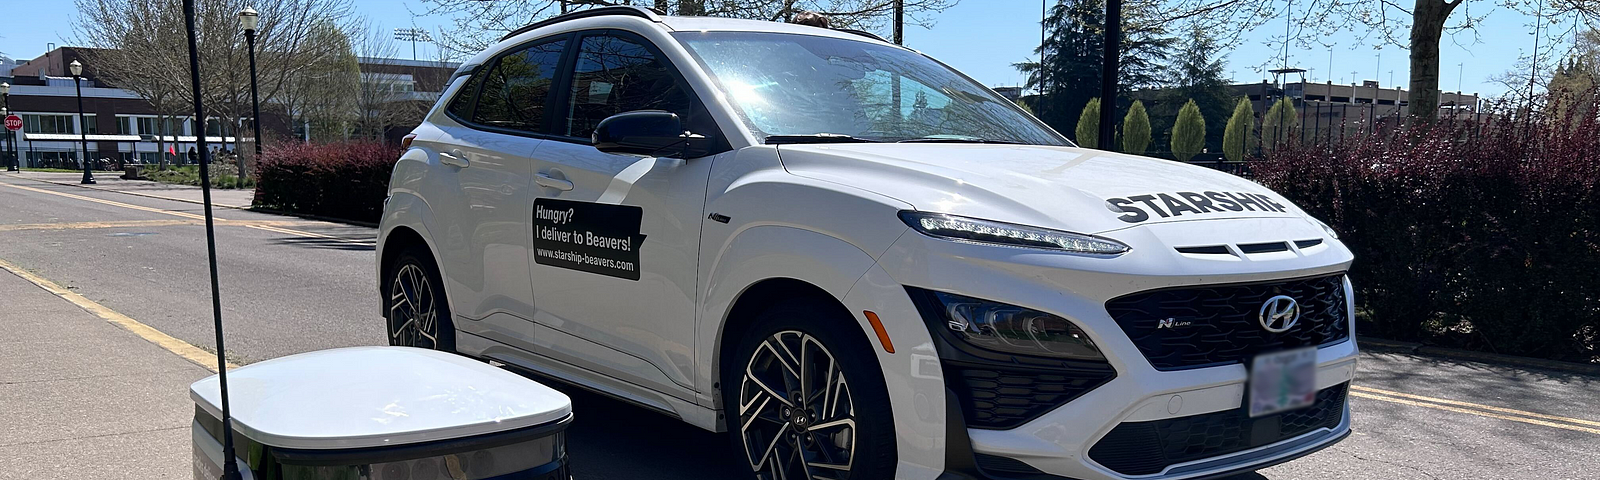 Image of a Starship Robot next to a white car with decals that read “Starship” and “Hungry? I deliver to Badgers” to make the white car look like a Starship Delivery Robot